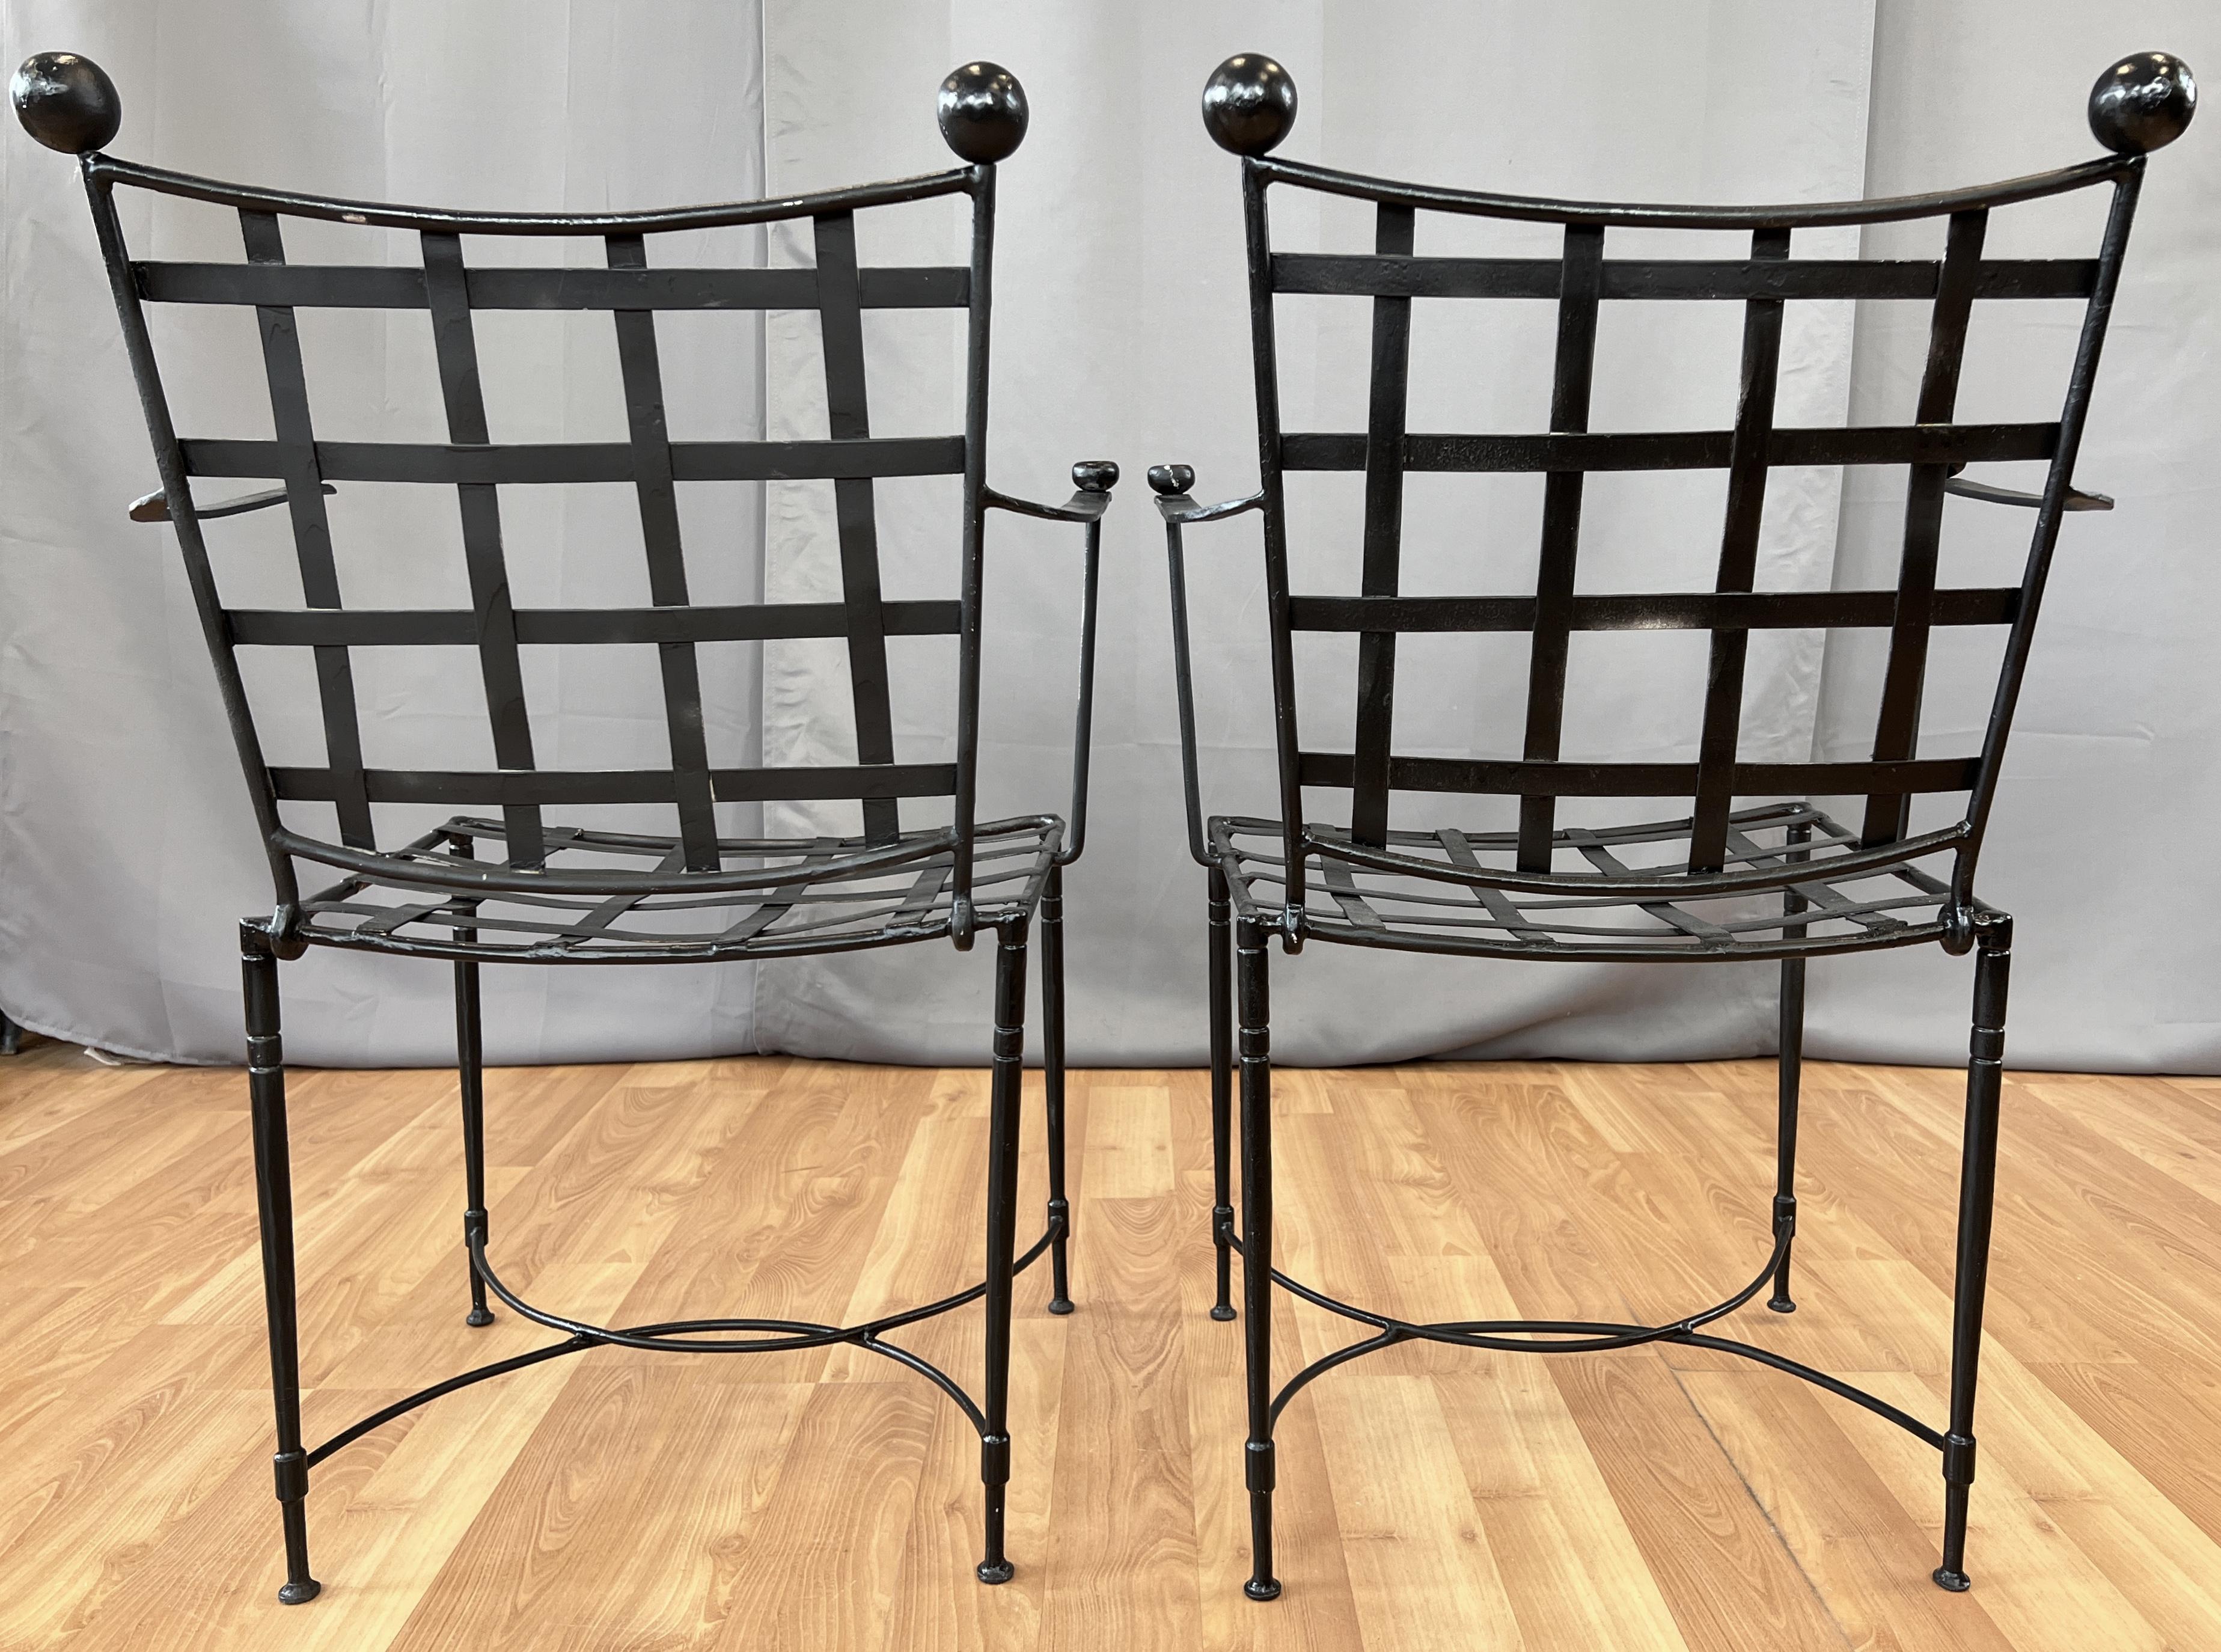 Mid-20th Century Pair of Woven Patio Chairs Designed by Mario Papperzini for John Salterini 